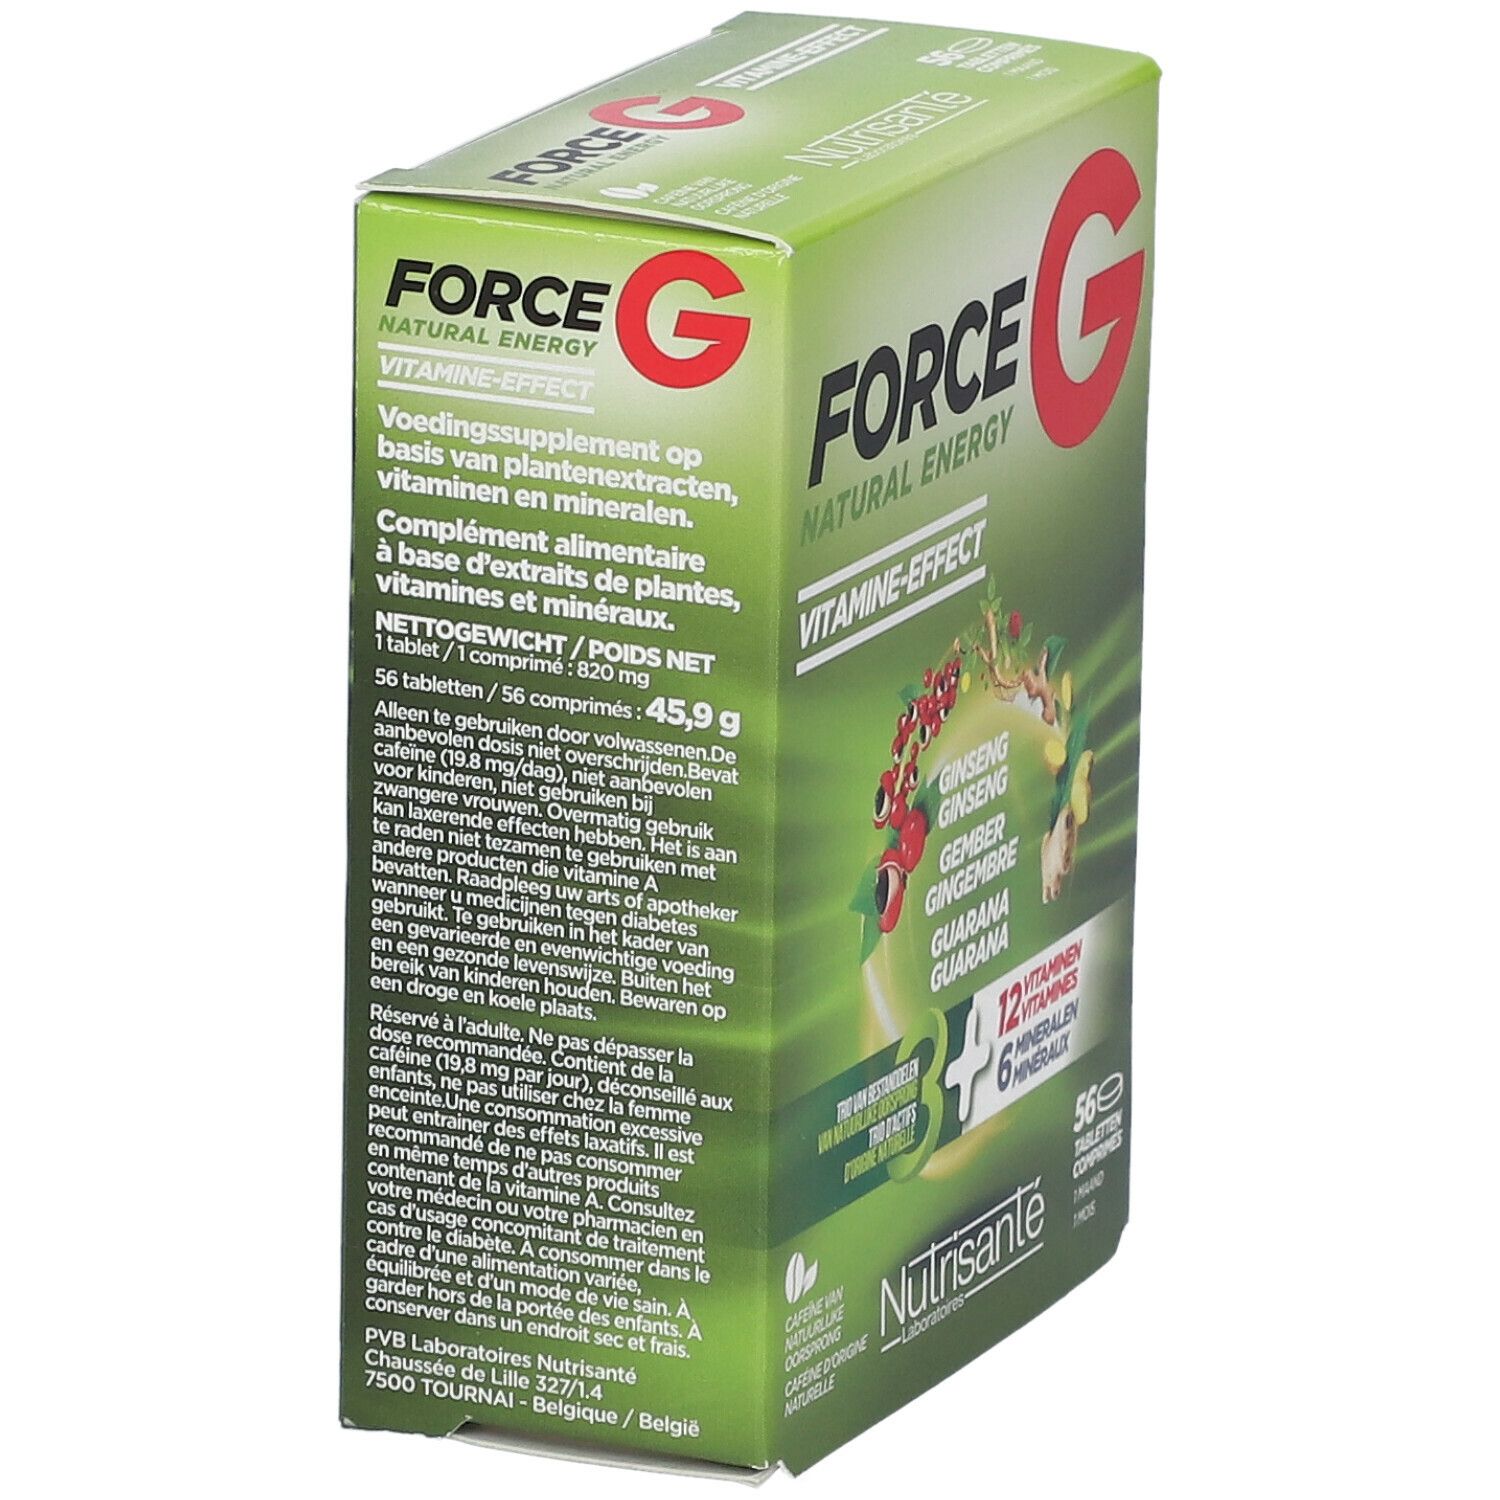 Nutrisante Force G Natural Energy